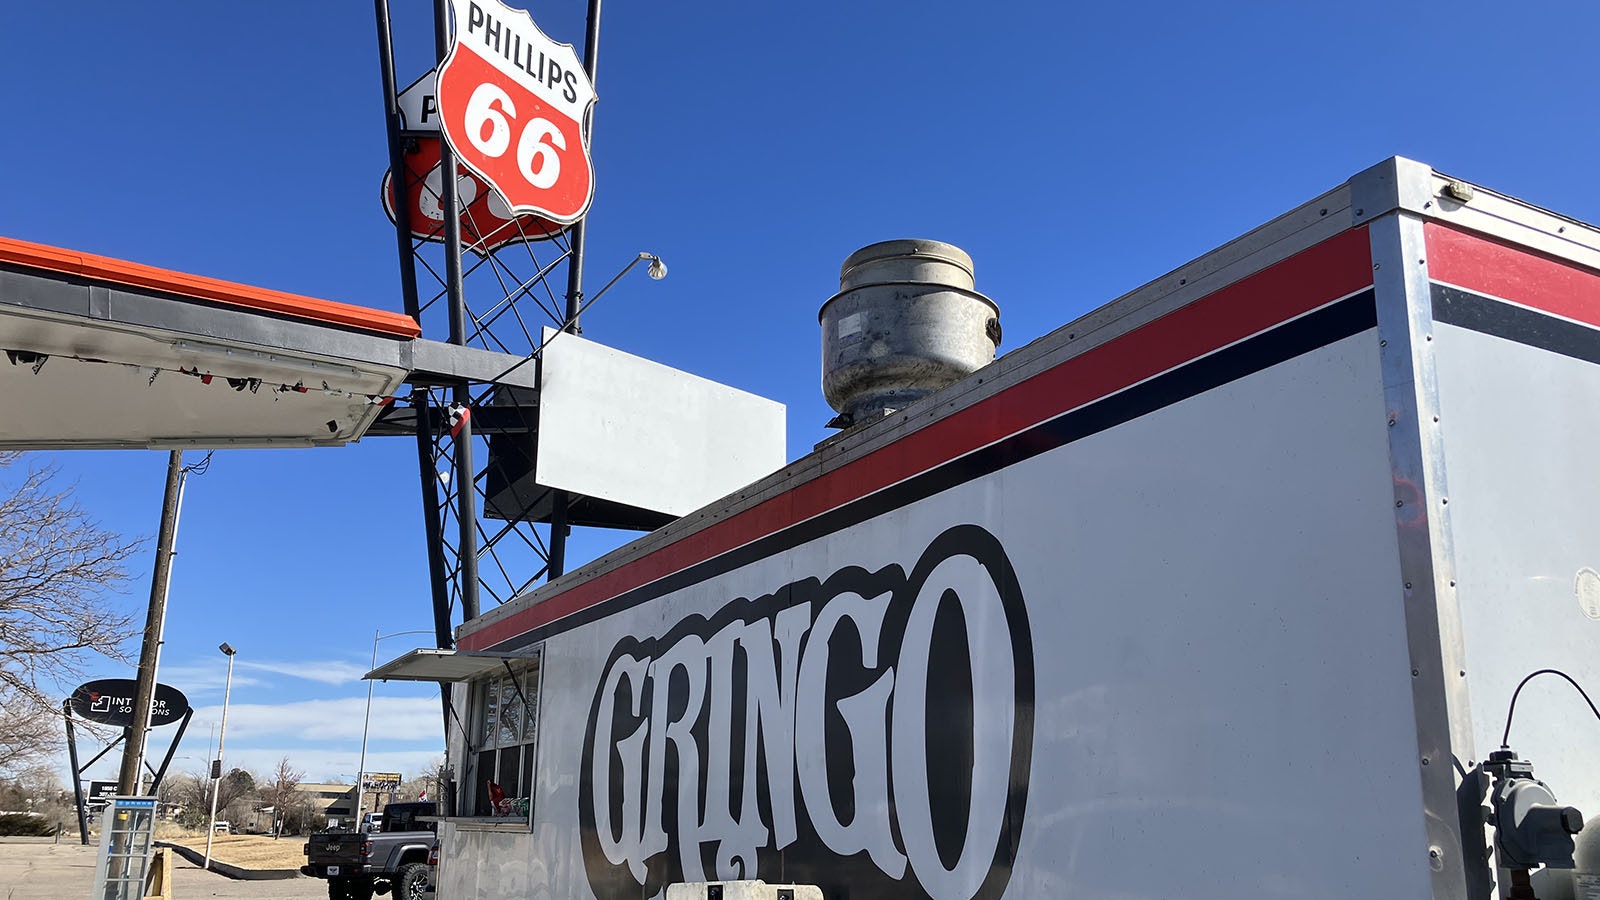 The Gringo food truck is owned by Parke and his vision is to possibly go “bricks and mortar” inside the Phillips 66 gas station with a restaurant.